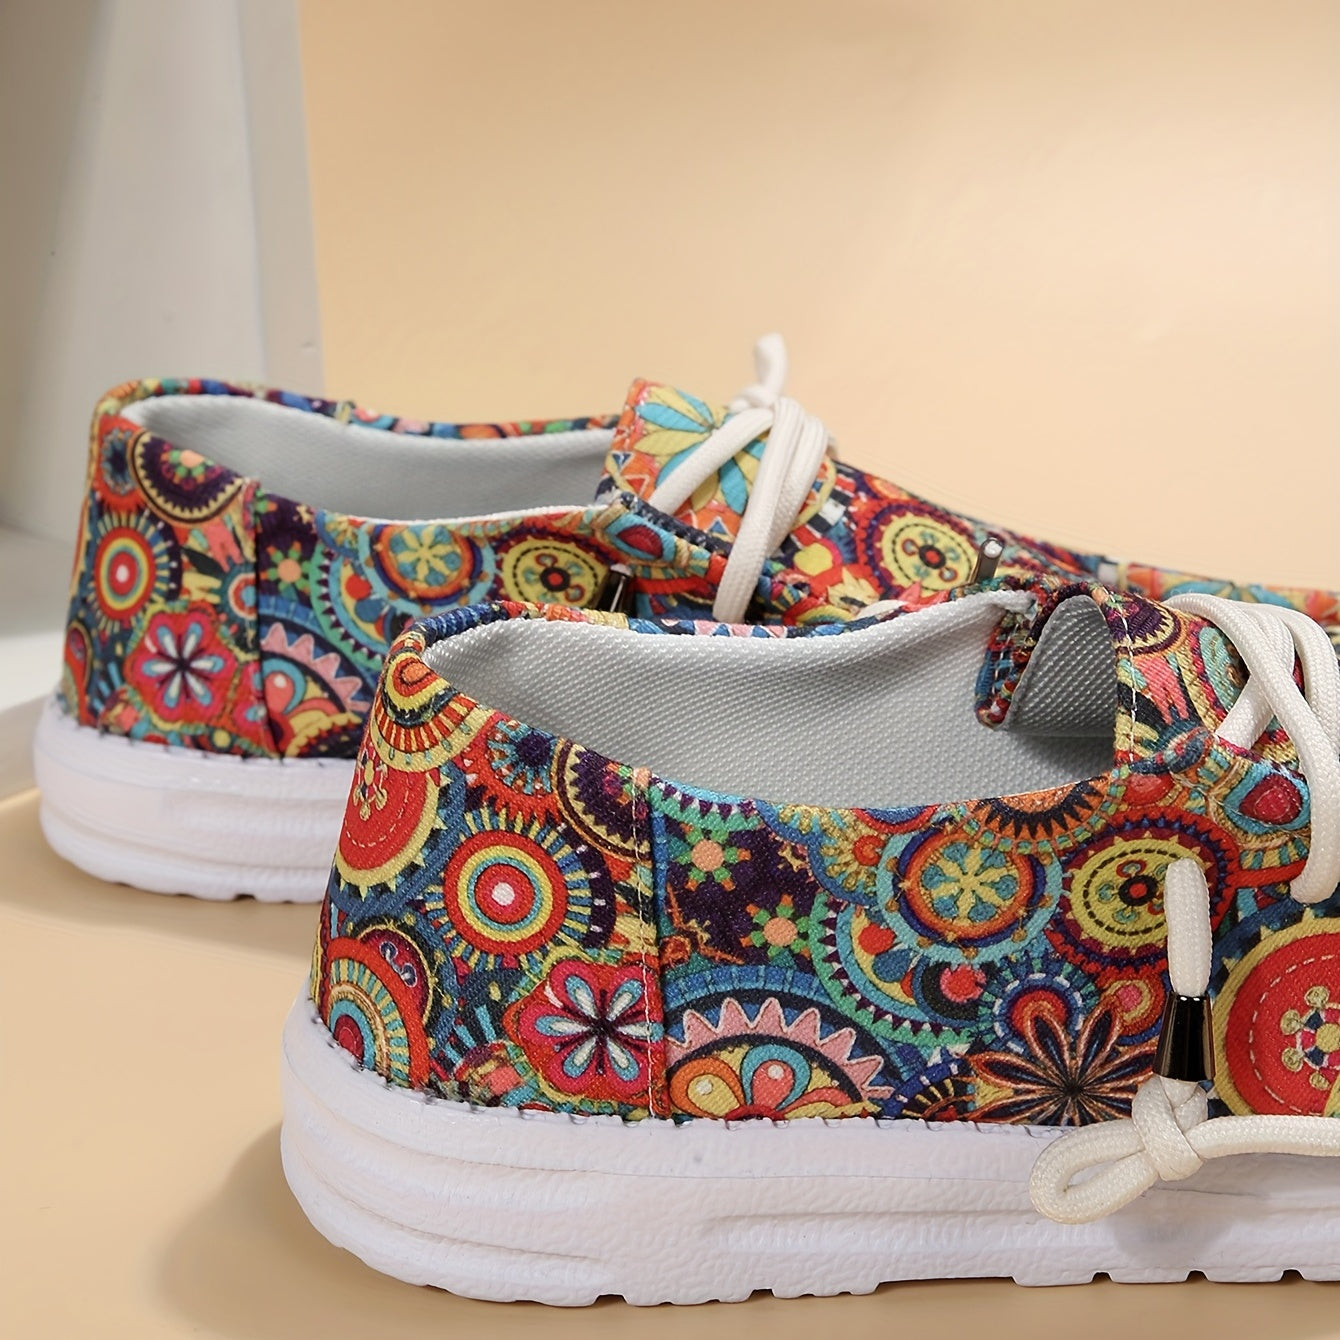 Women's Colorful Pattern Canvas Shoes, Slip On Low-top Round Toe Lightweight Non-slip Flat Shoes, Comfy Daily Shoes